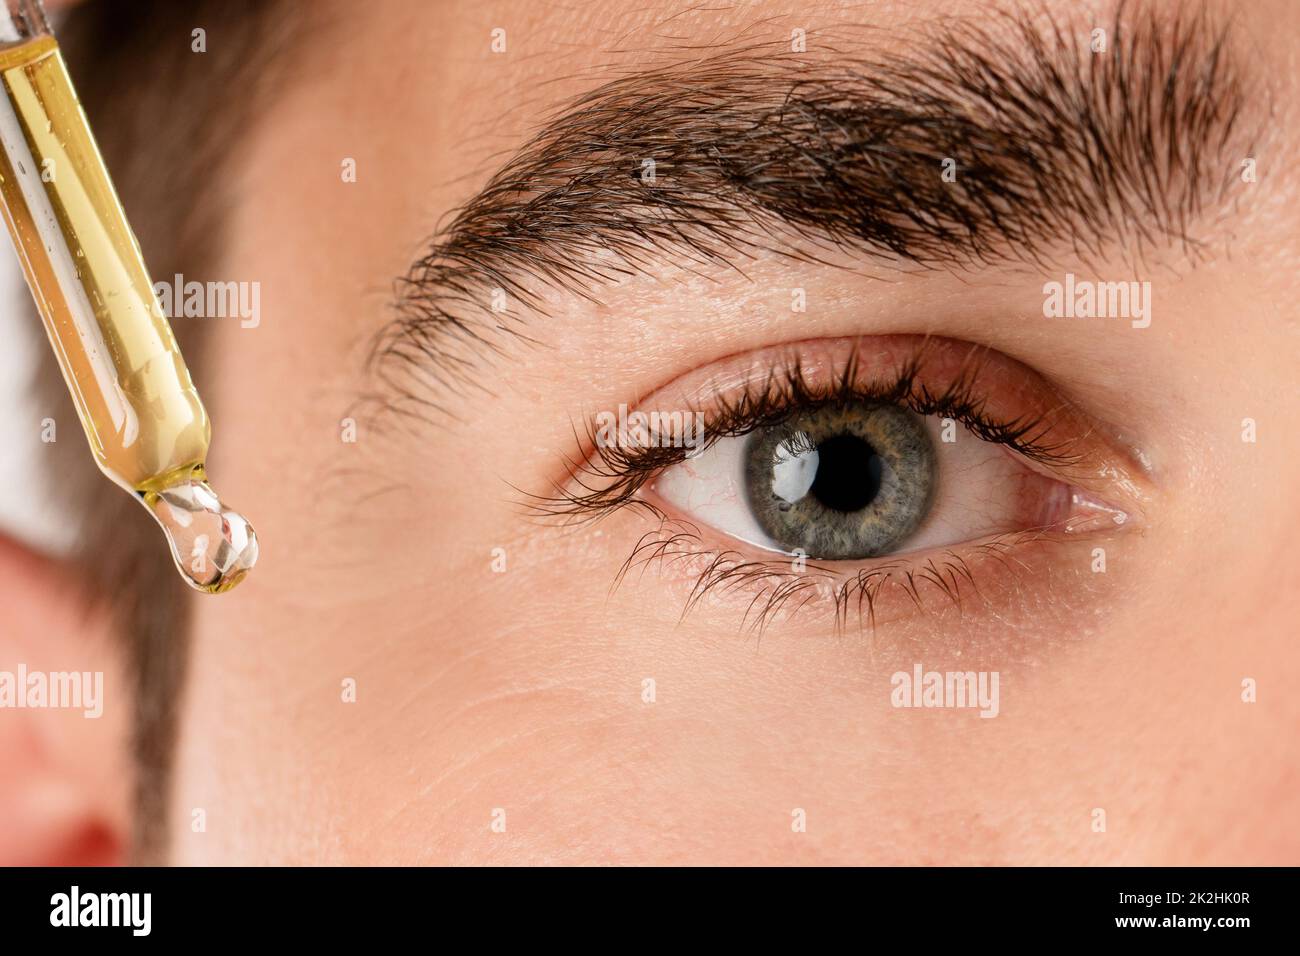 Male eye and pipette with a moisturizing oil Stock Photo